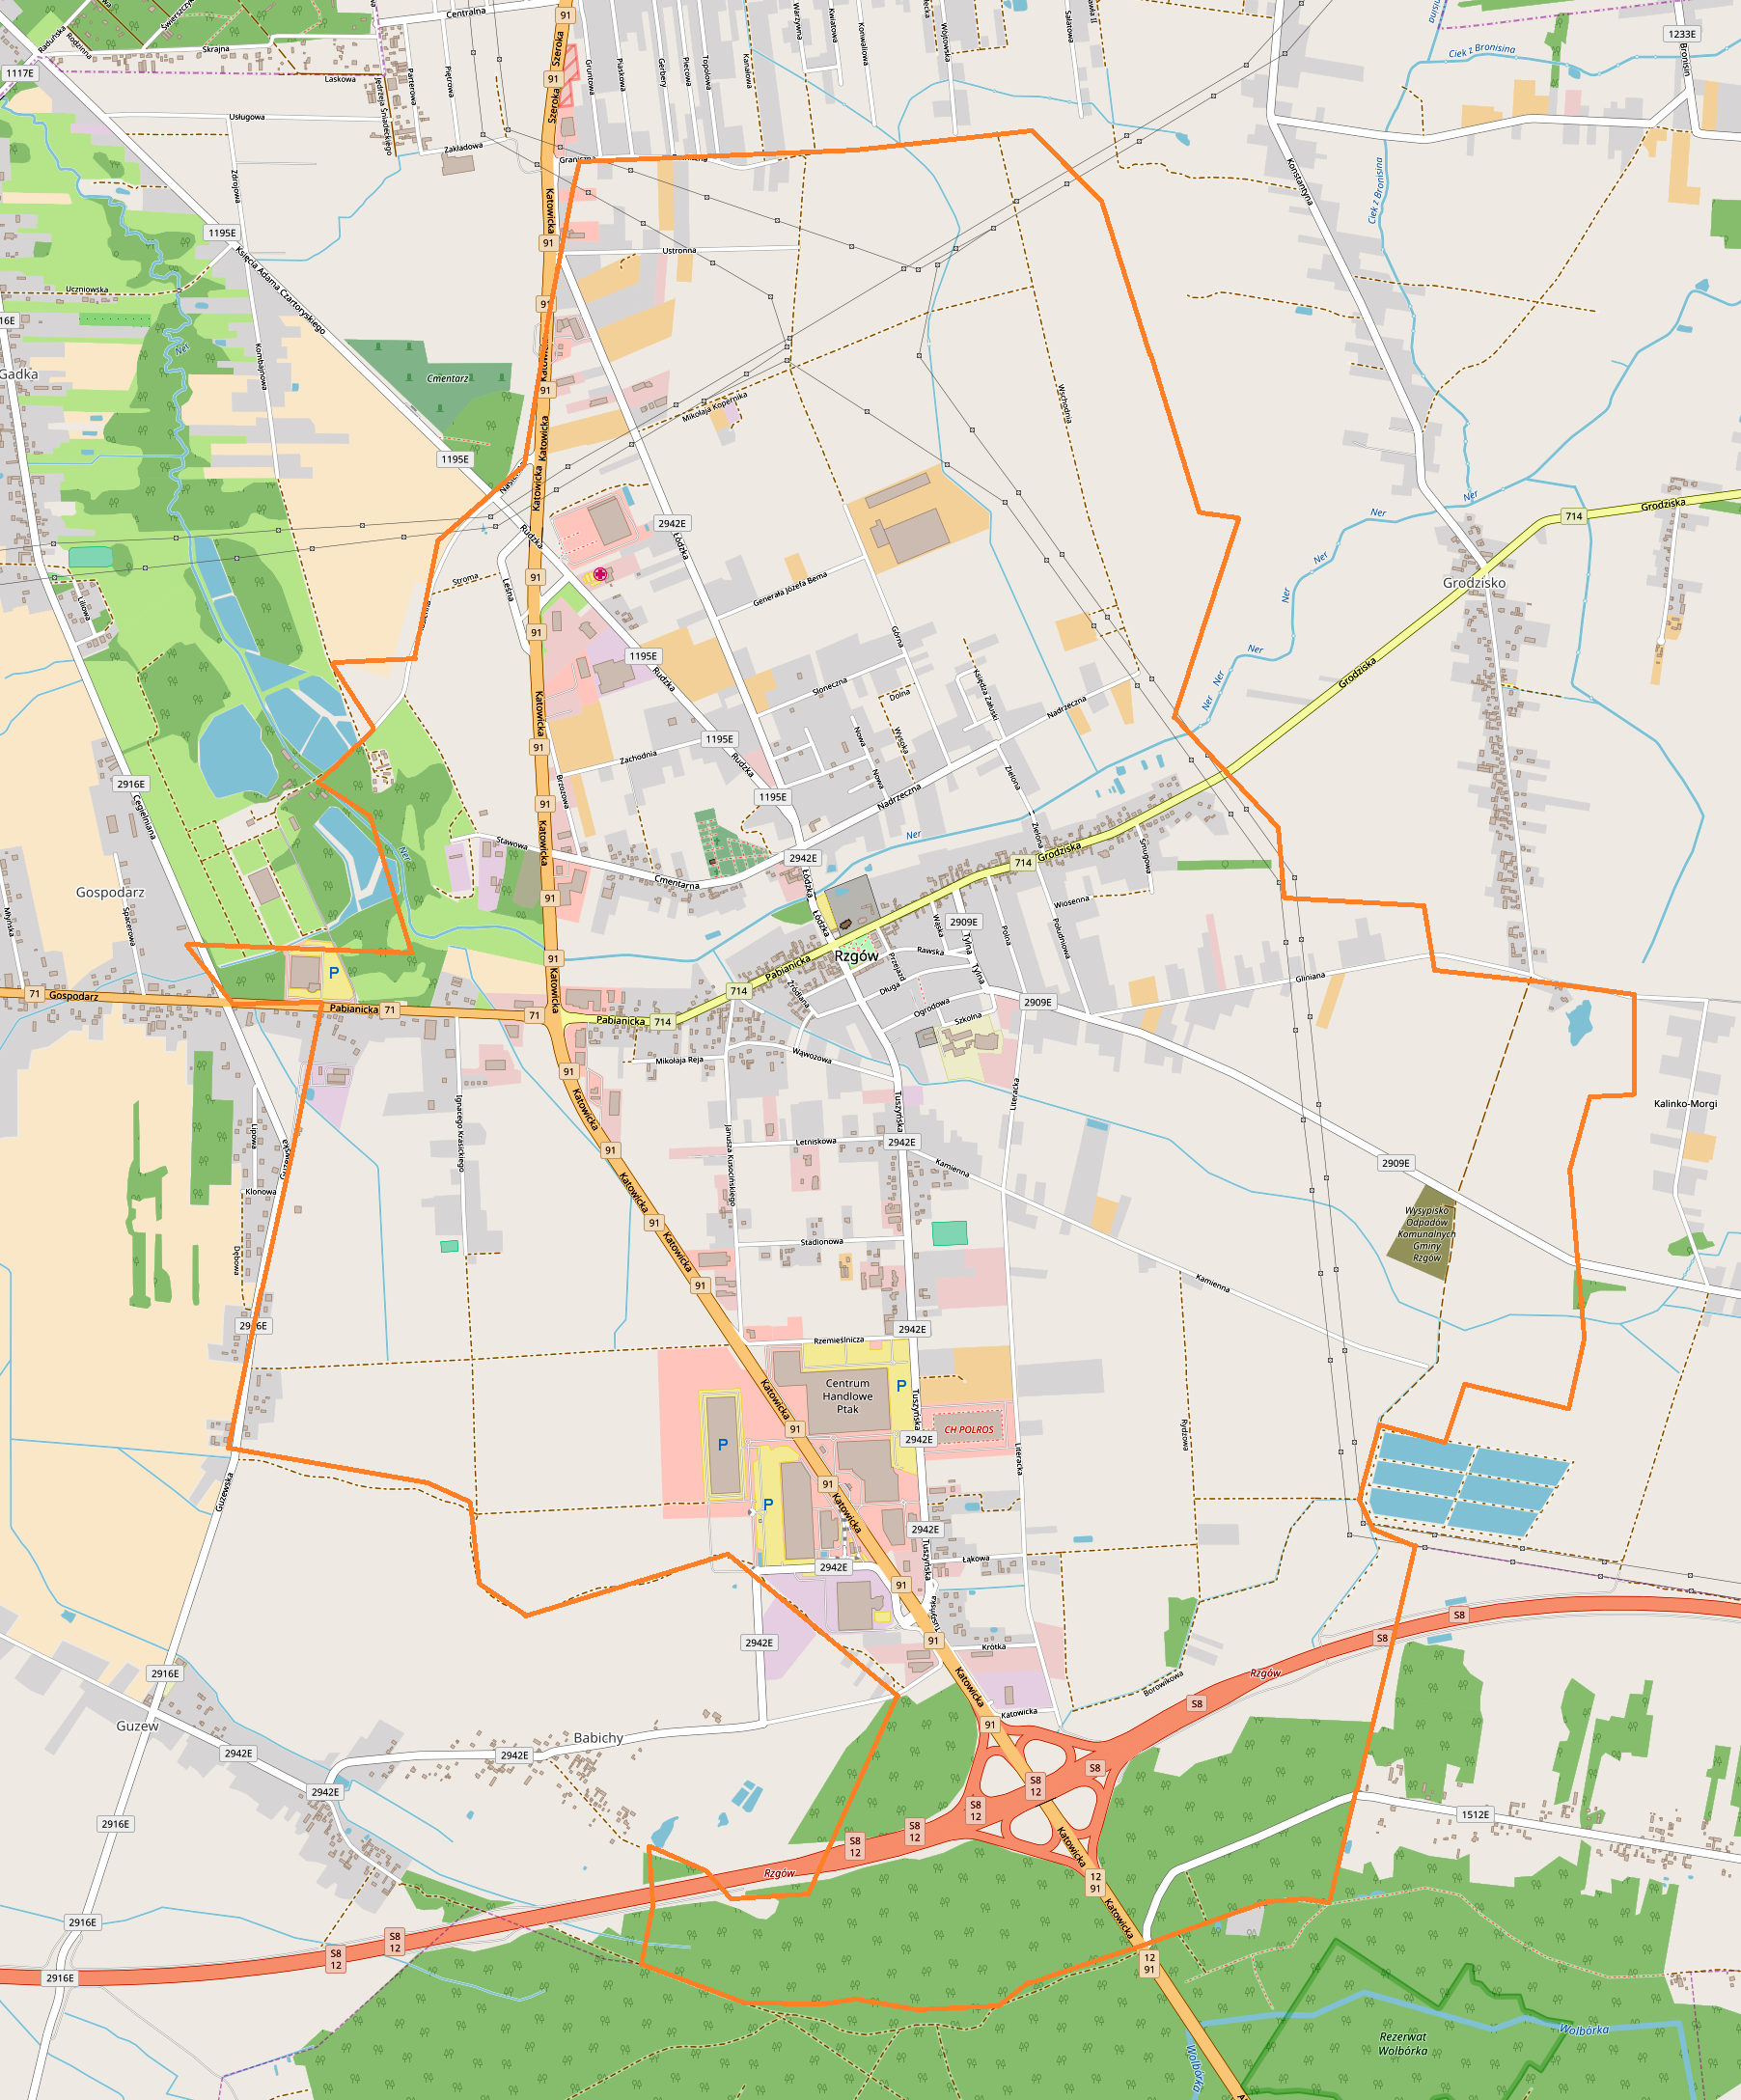 File:Rzgów location map.png - Wikimedia Commons